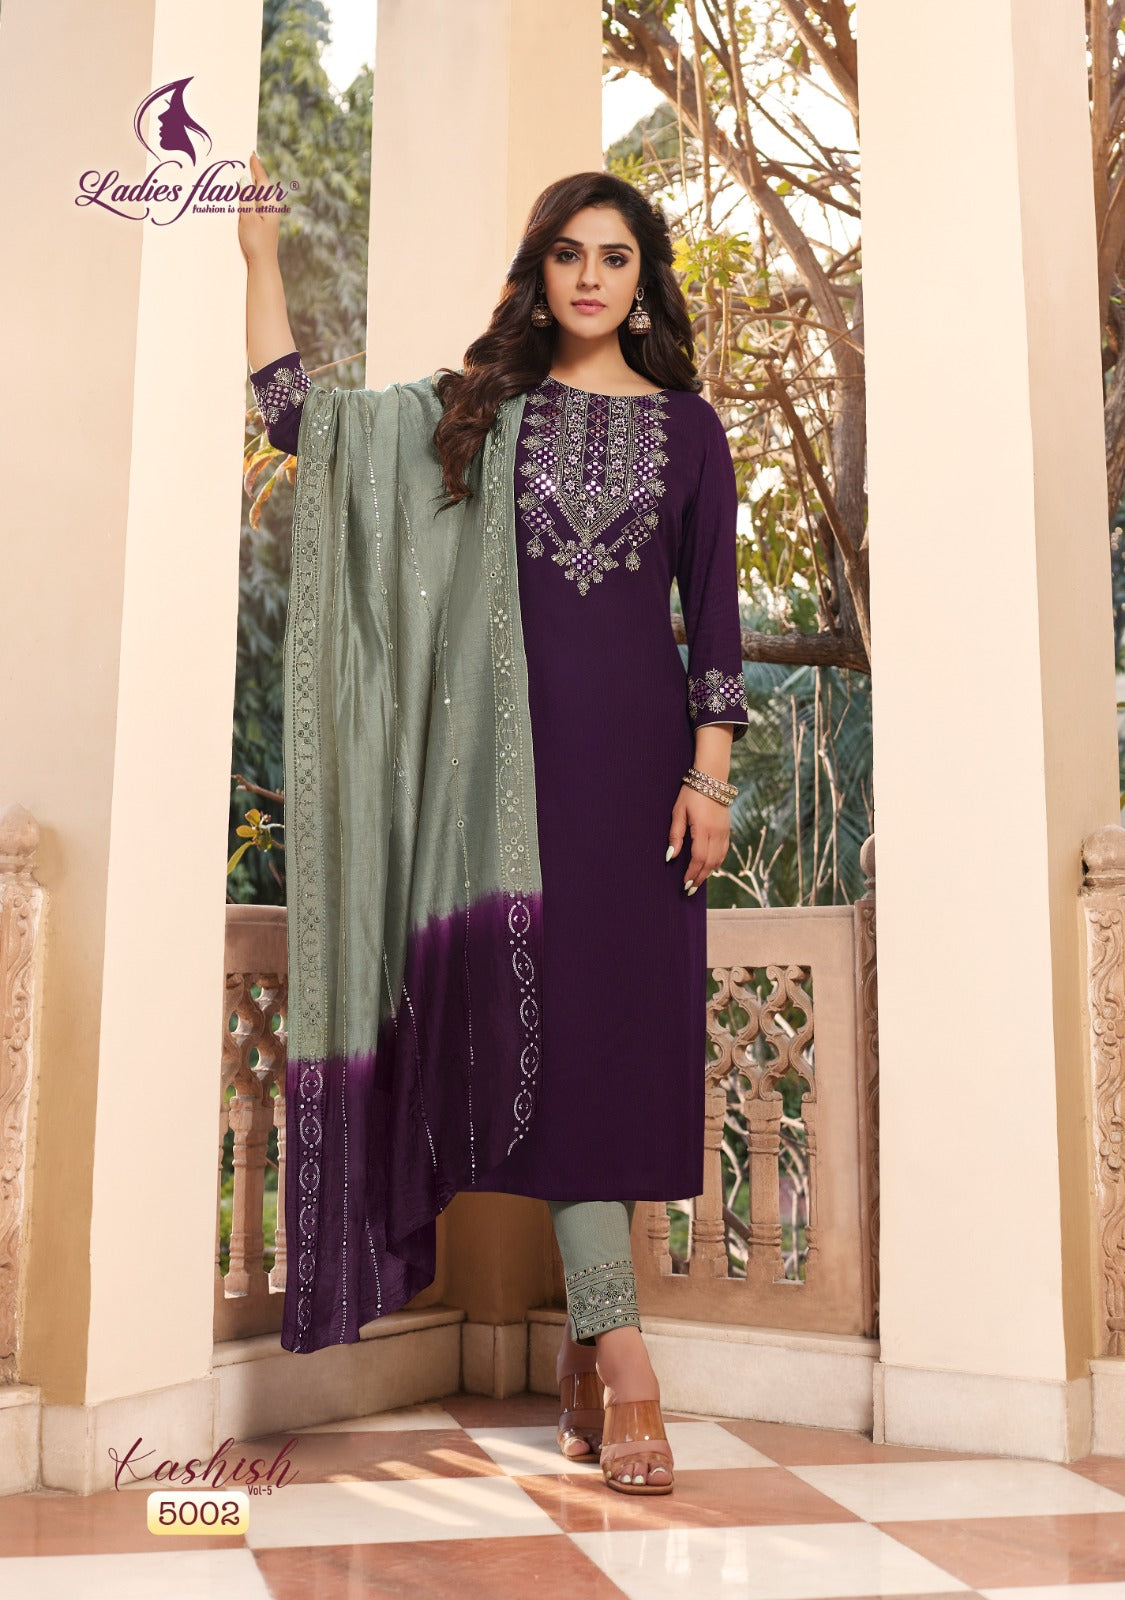 Kashish Vol 5 Ladies Flavour Rayon Readymade Pant Style Suits